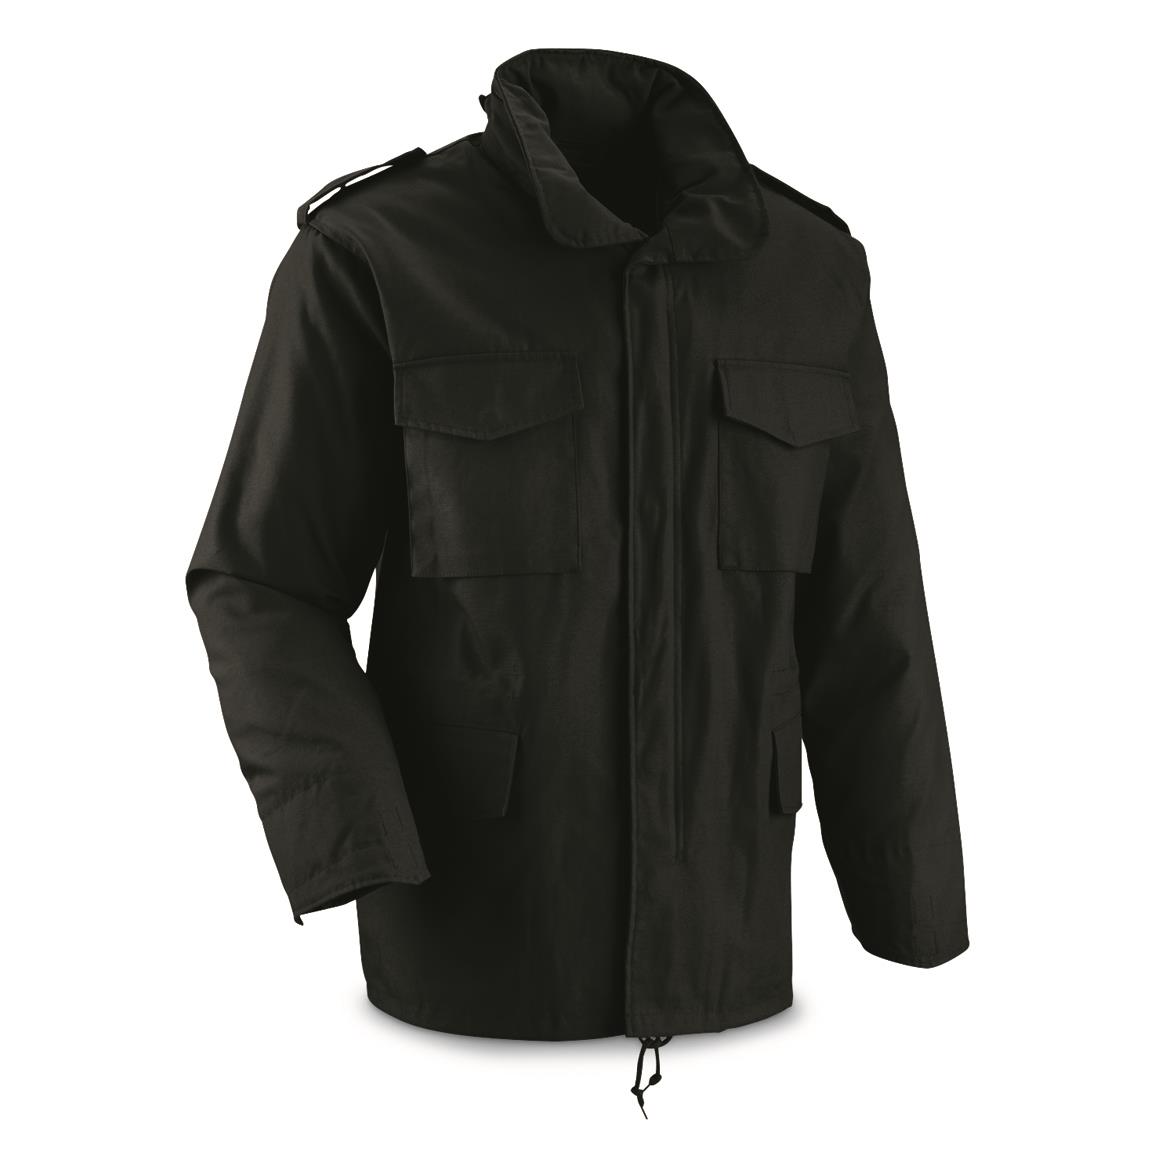 Fox Tactical M65 Field Jacket with Liner, Black